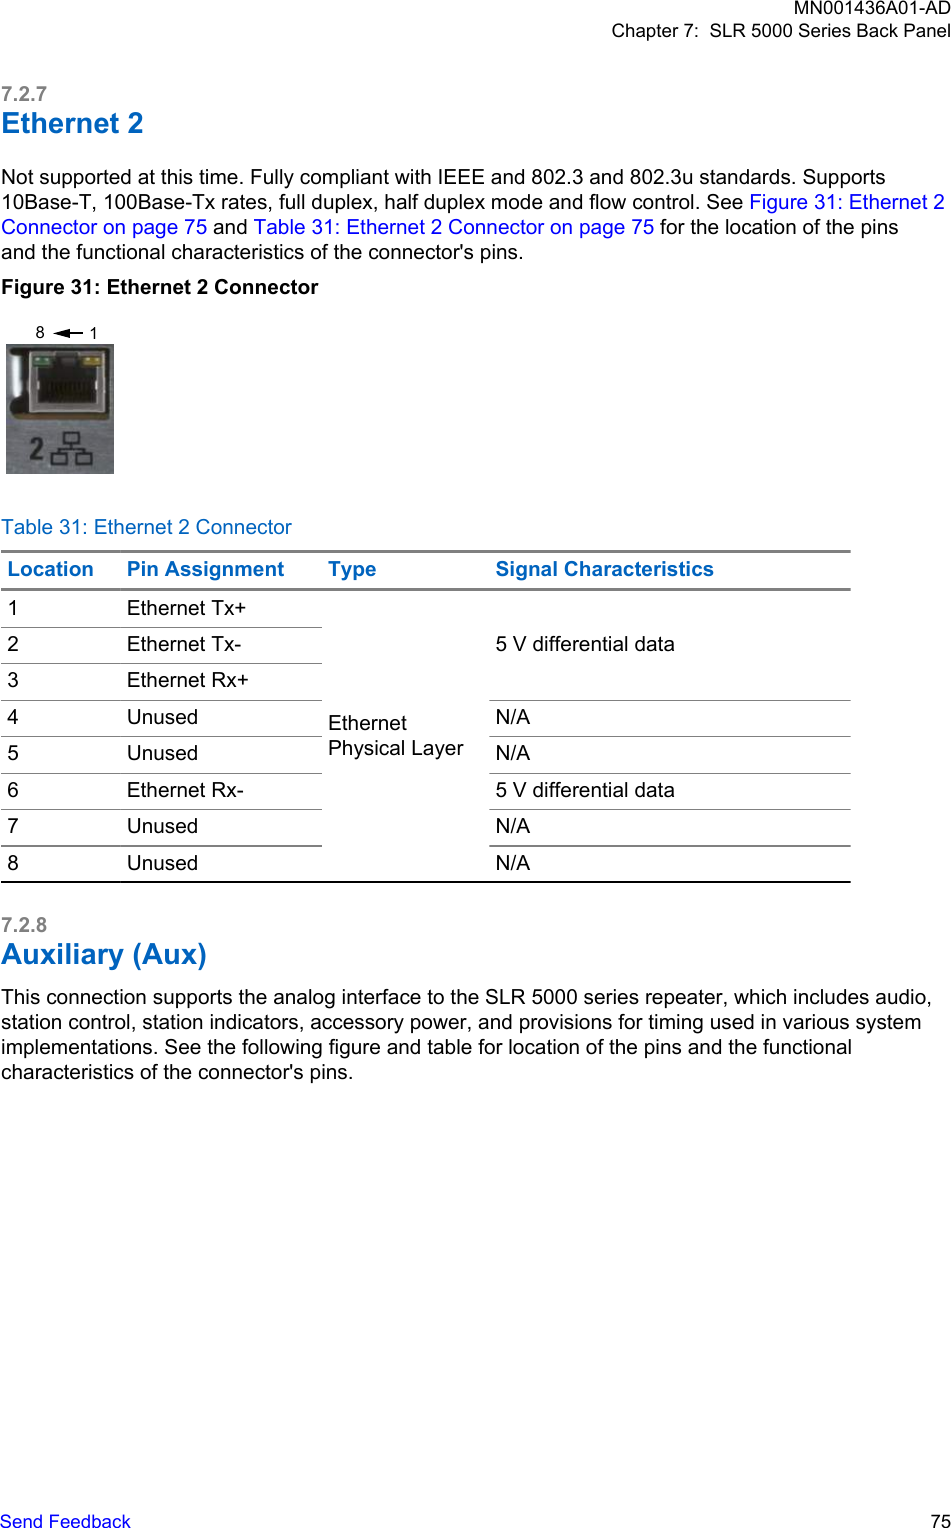 7.2.7Ethernet 2Not supported at this time. Fully compliant with IEEE and 802.3 and 802.3u standards. Supports10Base-T, 100Base-Tx rates, full duplex, half duplex mode and flow control. See Figure 31: Ethernet 2Connector on page 75 and Table 31: Ethernet 2 Connector on page 75 for the location of the pinsand the functional characteristics of the connector&apos;s pins.Figure 31: Ethernet 2 Connector18Table 31: Ethernet 2 ConnectorLocation Pin Assignment Type Signal Characteristics1 Ethernet Tx+EthernetPhysical Layer5 V differential data2 Ethernet Tx-3 Ethernet Rx+4 Unused N/A5 Unused N/A6 Ethernet Rx- 5 V differential data7 Unused N/A8 Unused N/A7.2.8Auxiliary (Aux)This connection supports the analog interface to the SLR 5000 series repeater, which includes audio,station control, station indicators, accessory power, and provisions for timing used in various systemimplementations. See the following figure and table for location of the pins and the functionalcharacteristics of the connector&apos;s pins.MN001436A01-ADChapter 7:  SLR 5000 Series Back PanelSend Feedback   75